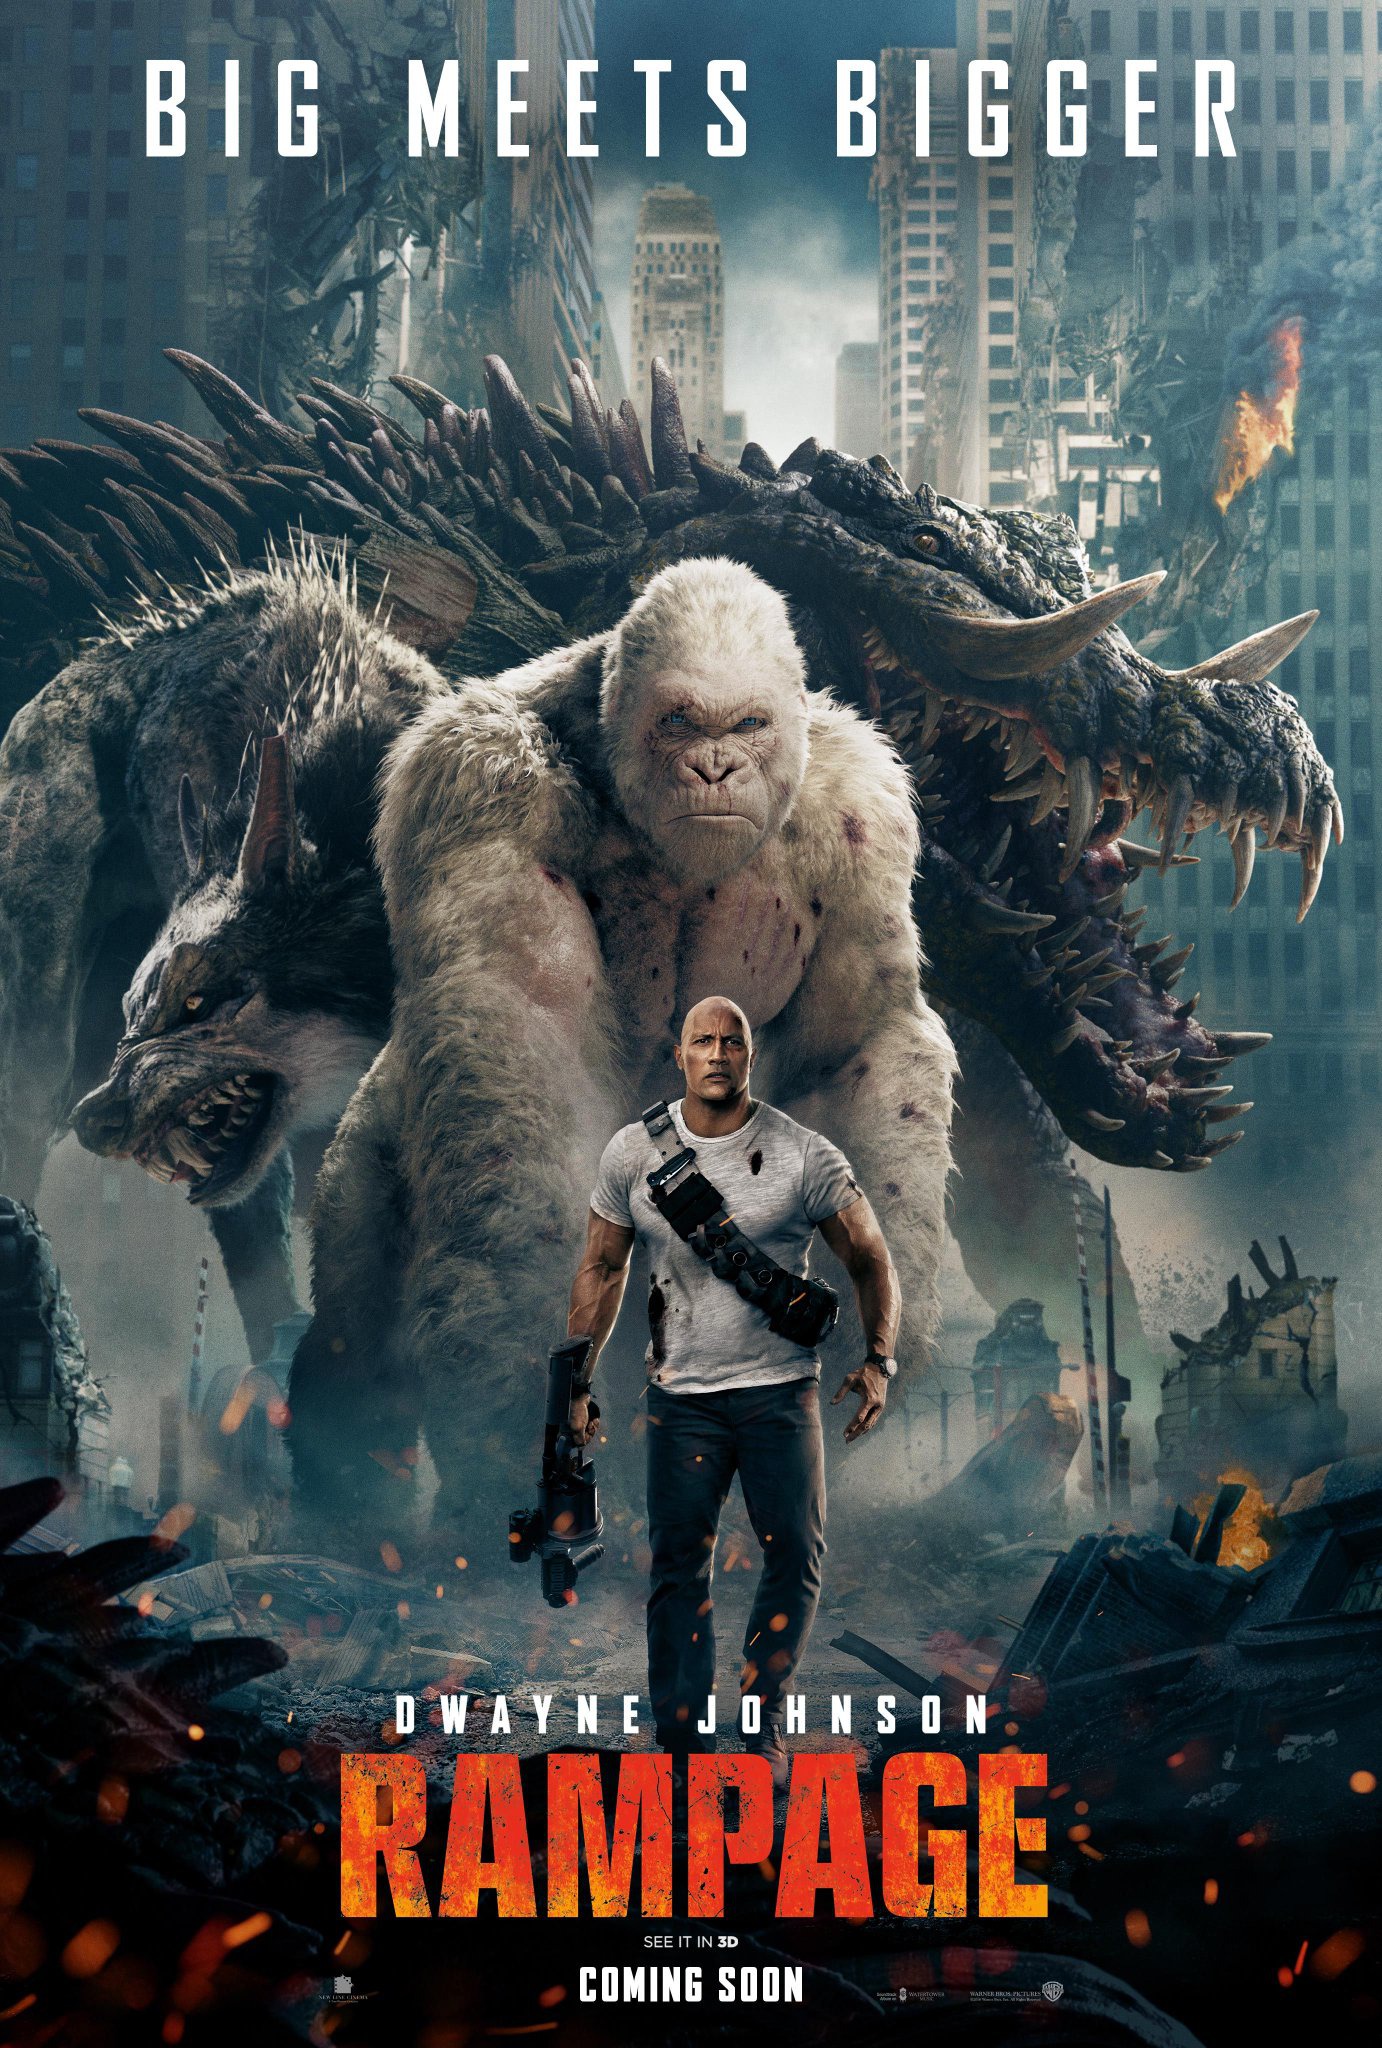 Watch online full movie Rampage 2018 on movie counter